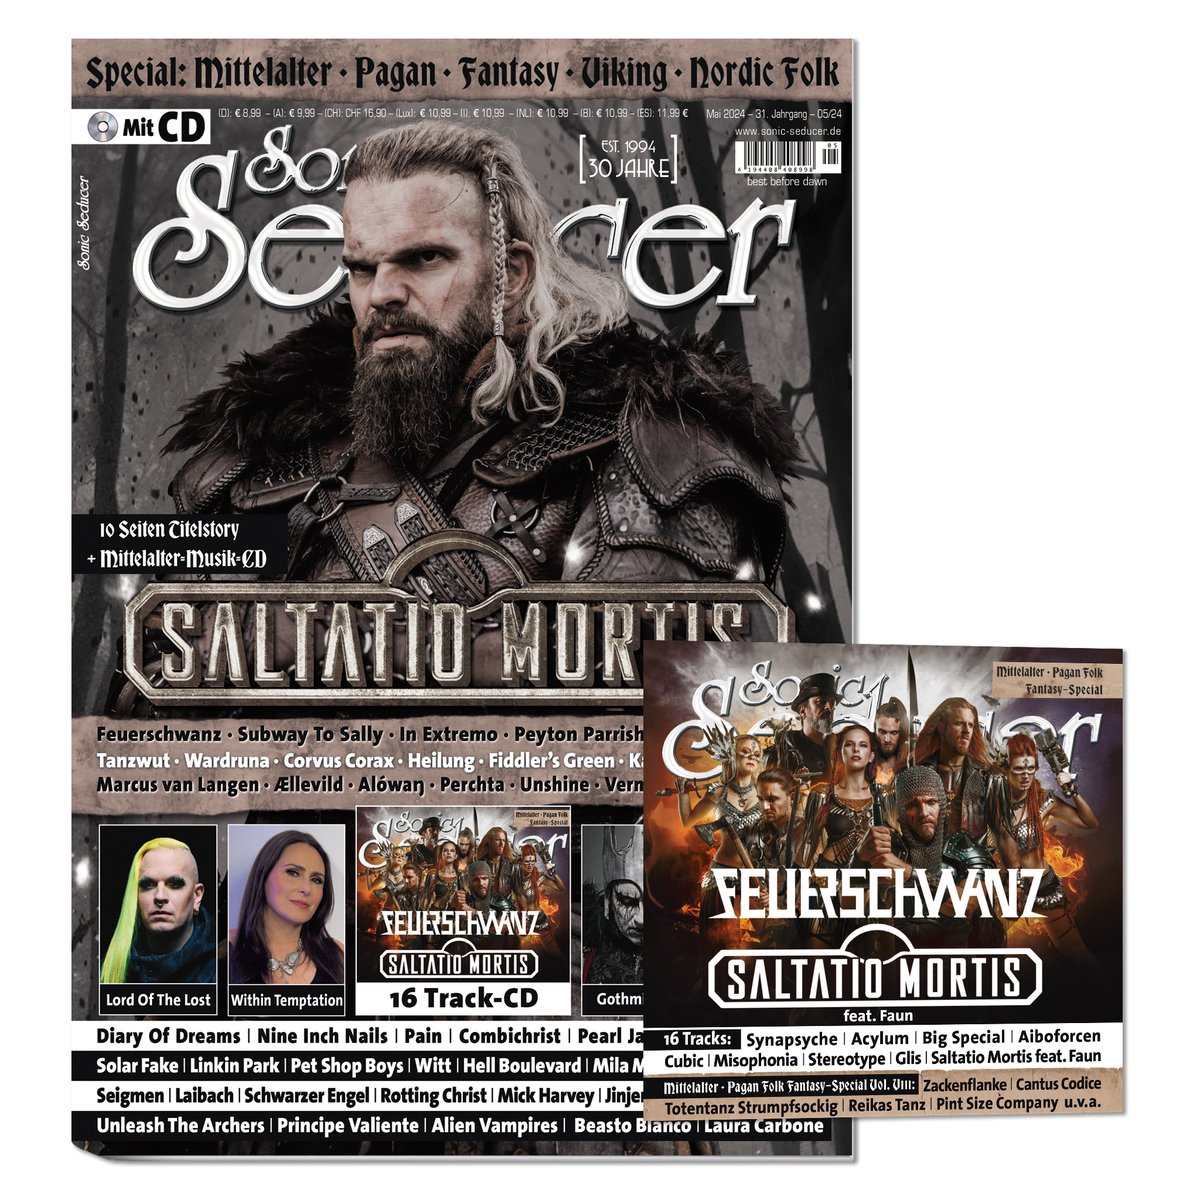 🇩🇪 GERMANIC PEOPLE!
Get the new issue of @Sonic_Seducer music magazine! The attached CD 'Cold Hand Seduction Vol.258' includes our hit ANTI MANIFESTO!

BUY IT NOW: sonic-seducer.de/online-shop/so…

#synapsyche #anti #ebm #darkelectro #industrial #aggrotech #harsh #harshebm #dark #electro